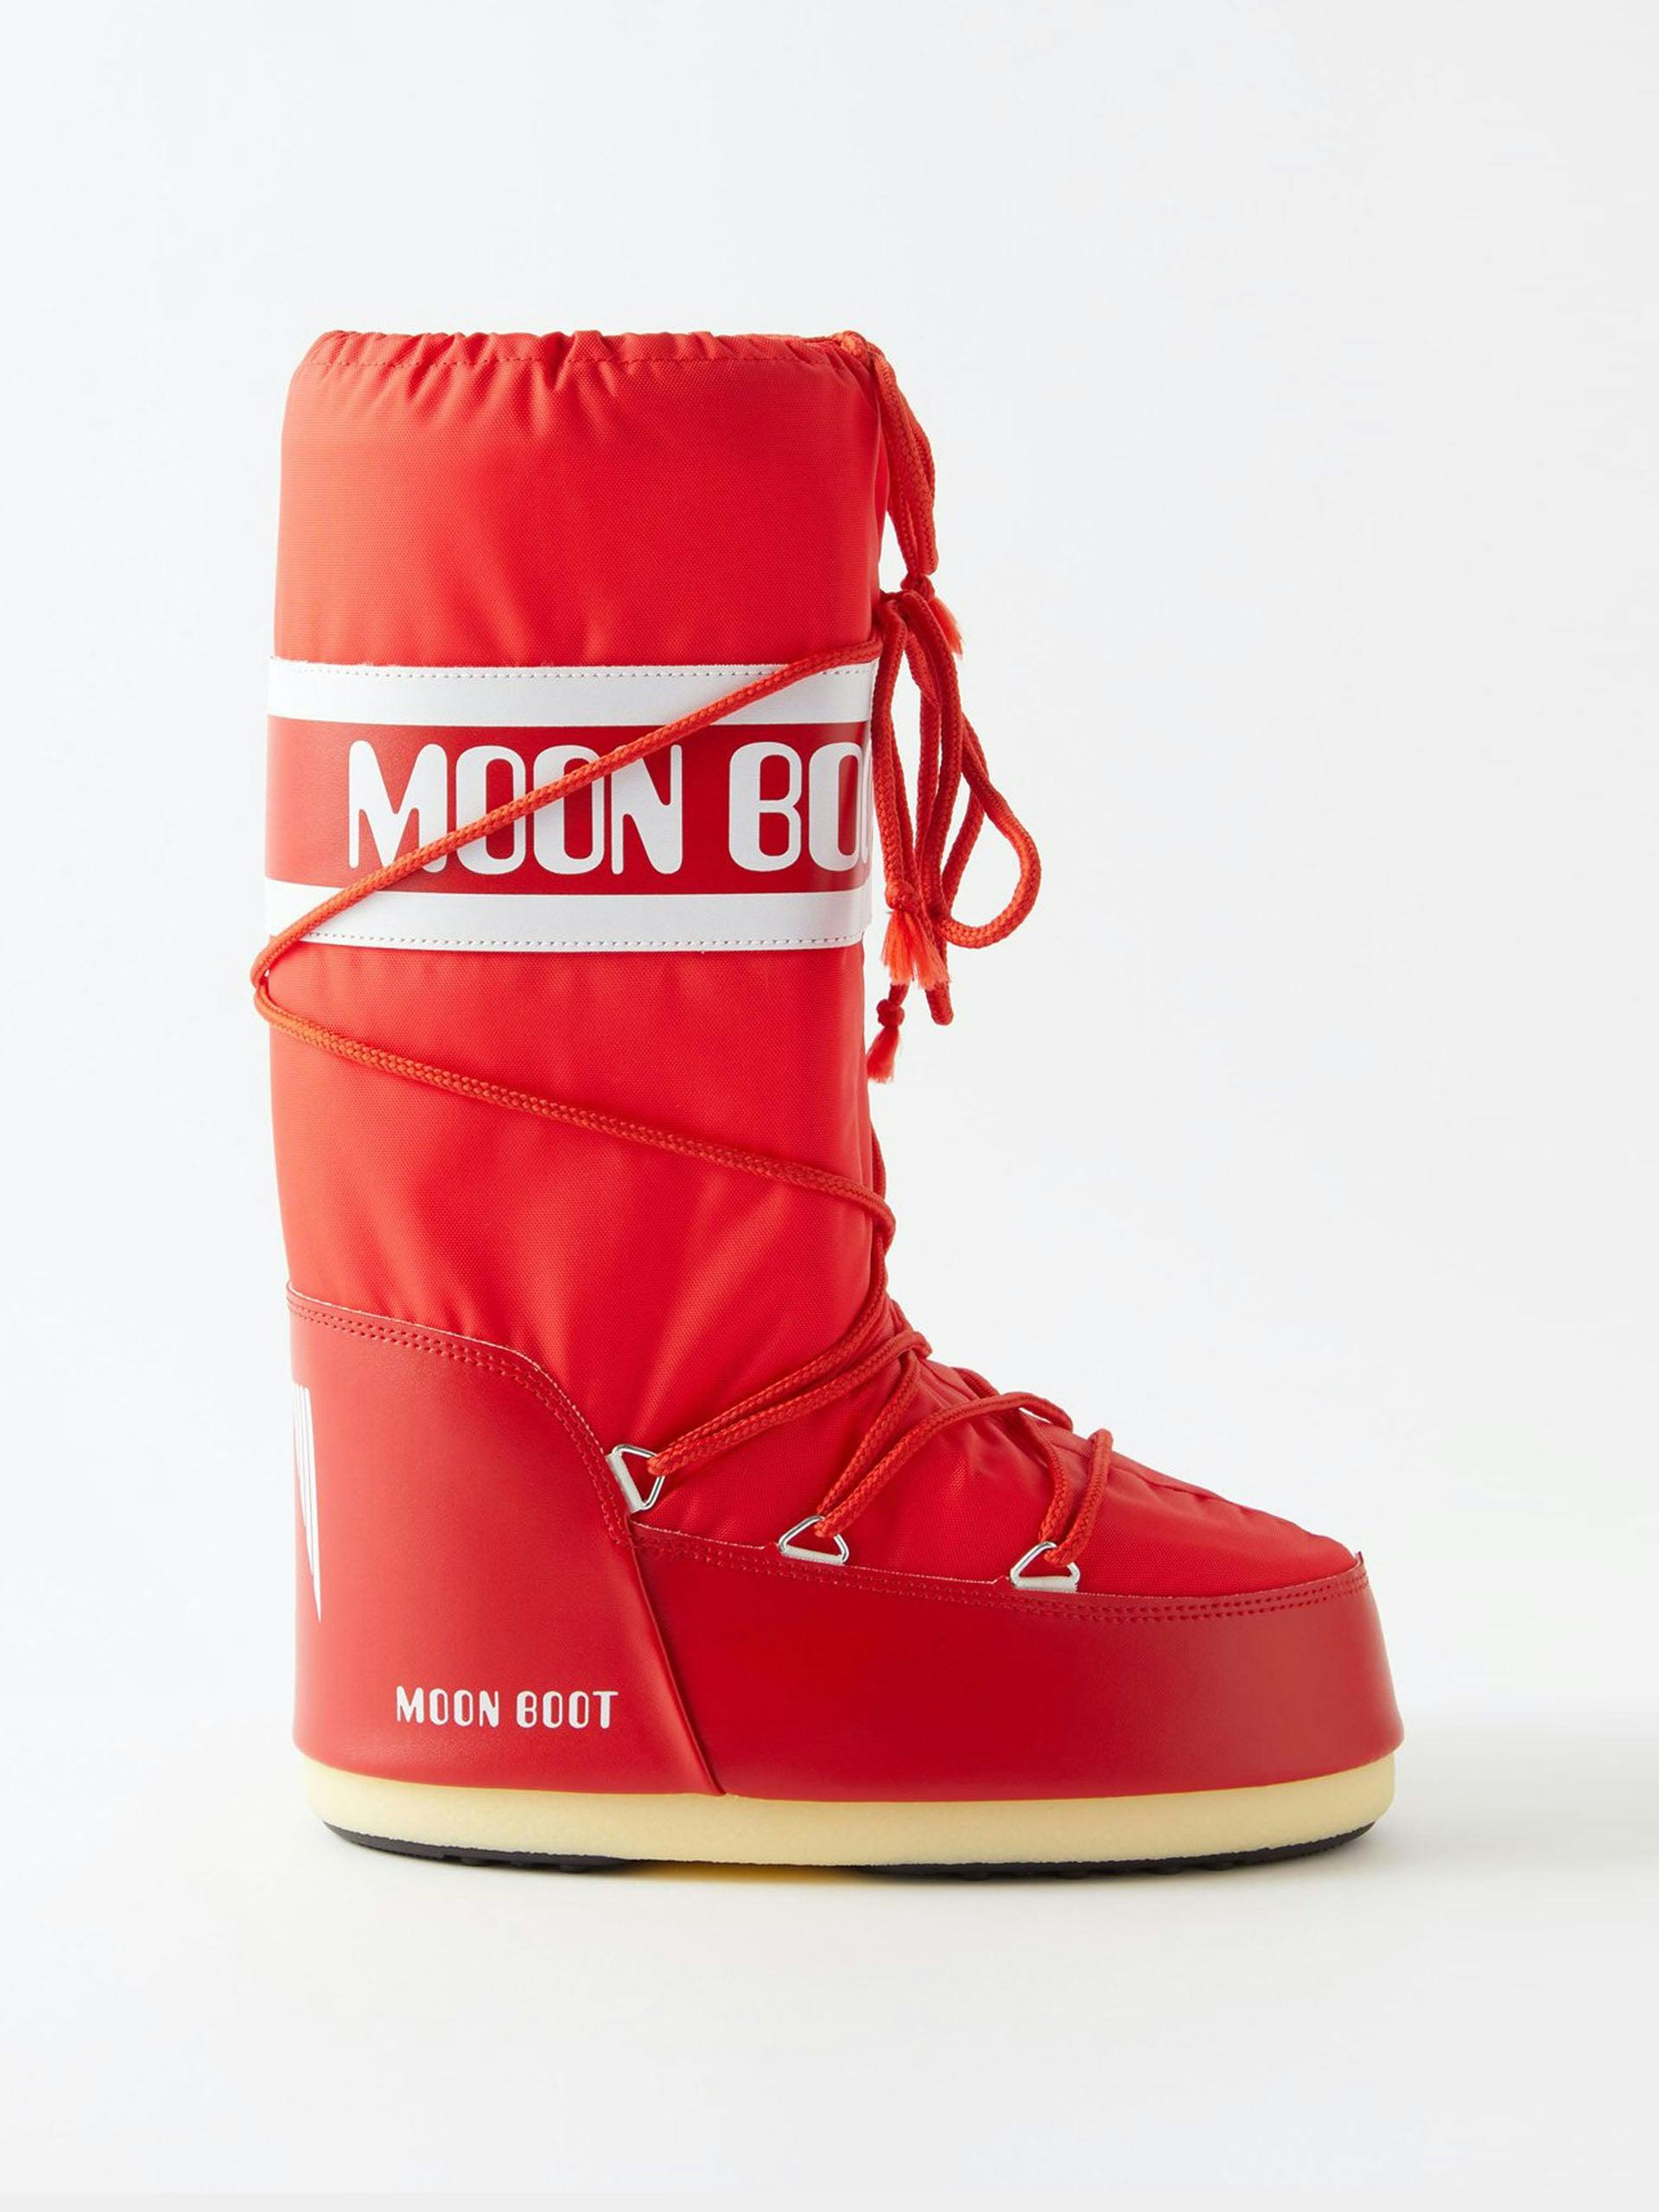 Red snow boots